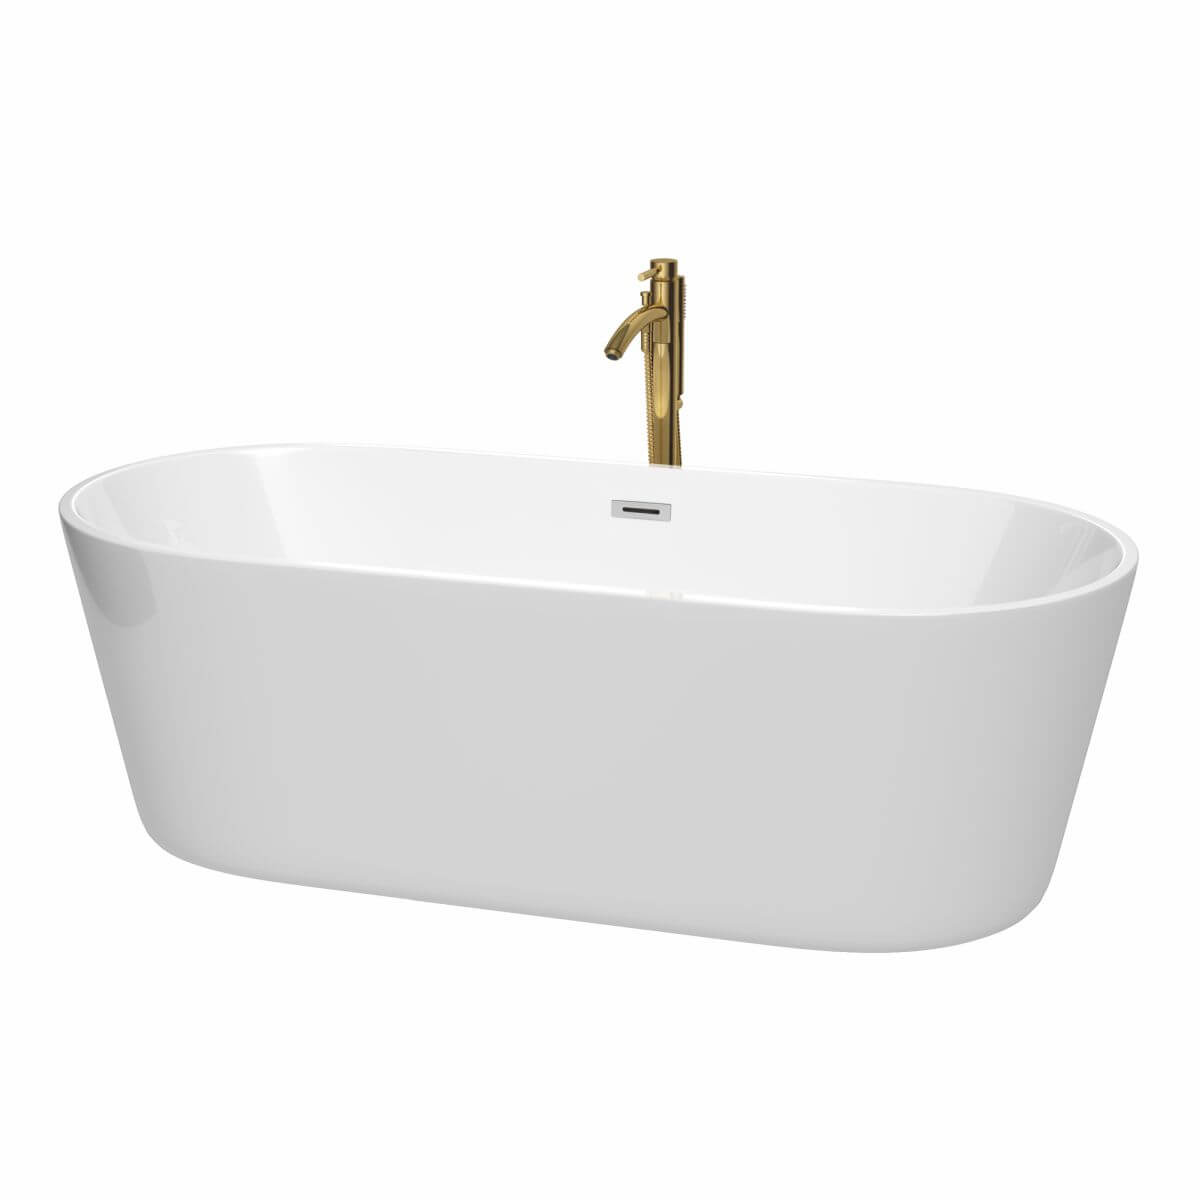 Wyndham Collection Carissa 71 inch Freestanding Bathtub in White with Polished Chrome Trim and Floor Mounted Faucet in Brushed Gold - WCOBT101271PCATPGD